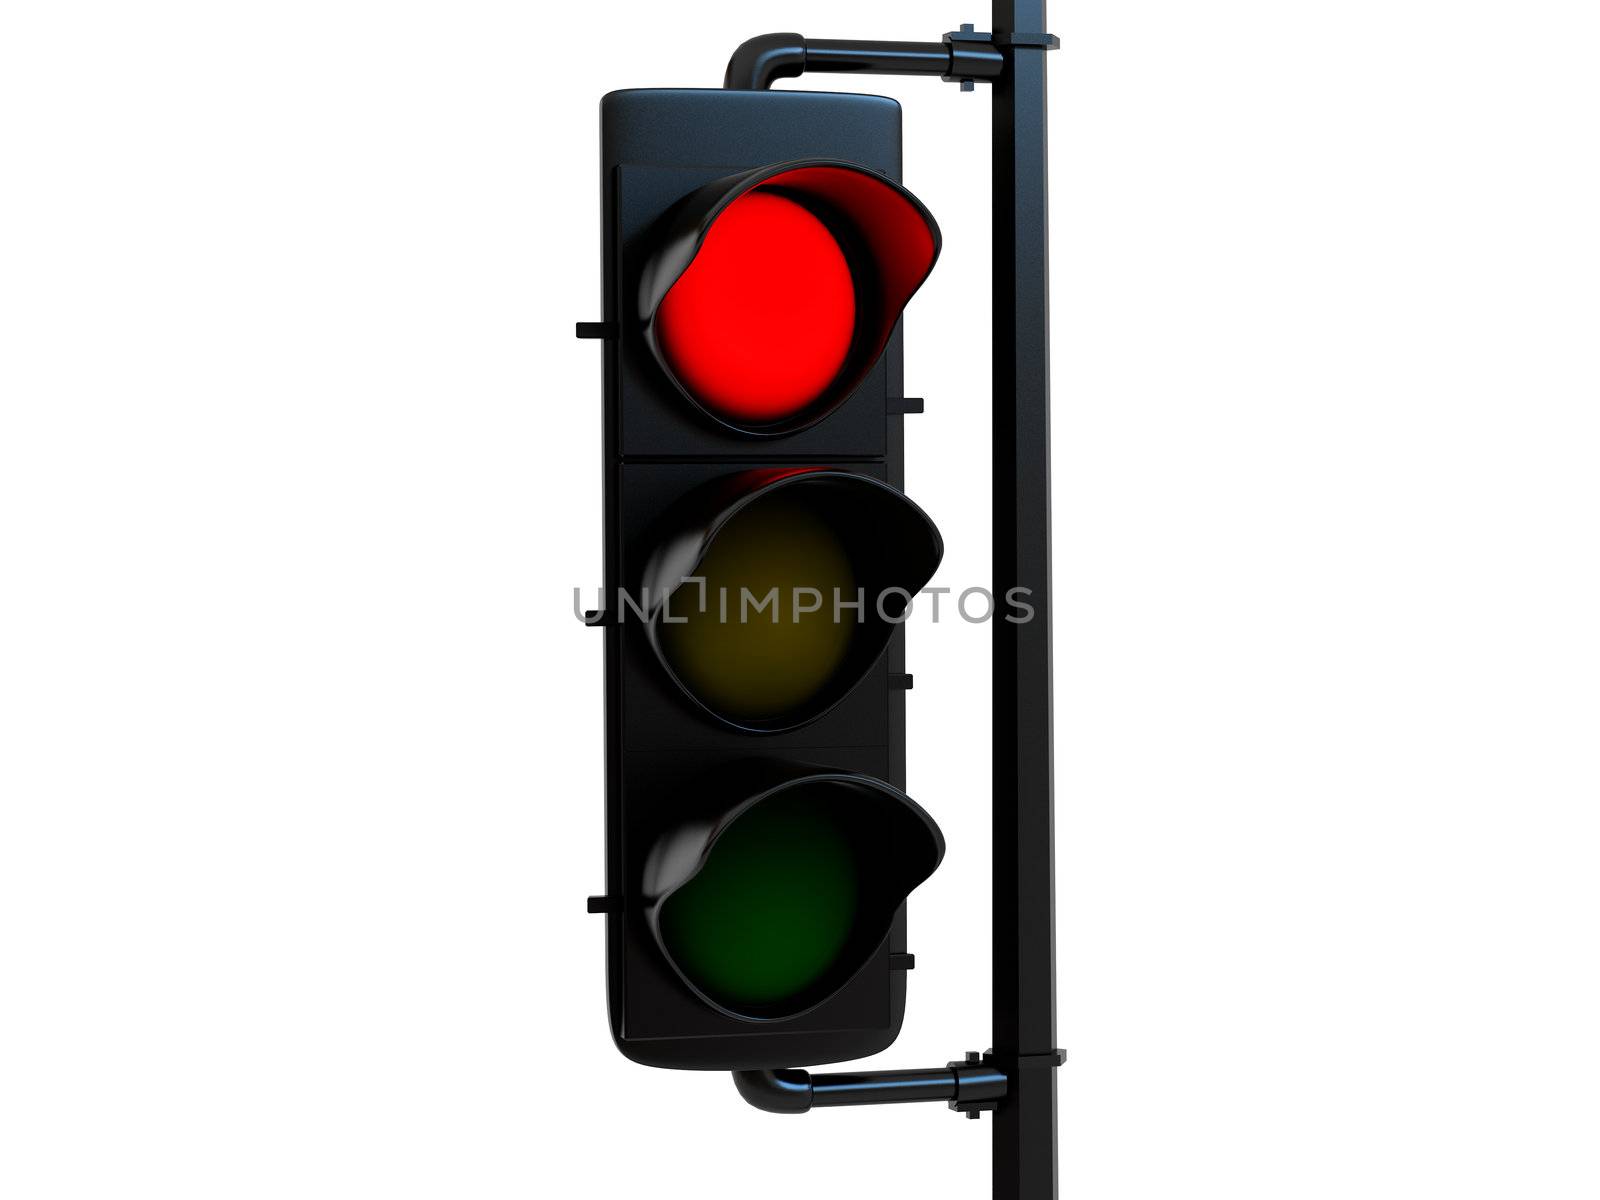 High resolution image traffic light red with light.  3d illustration over  white backgrounds.